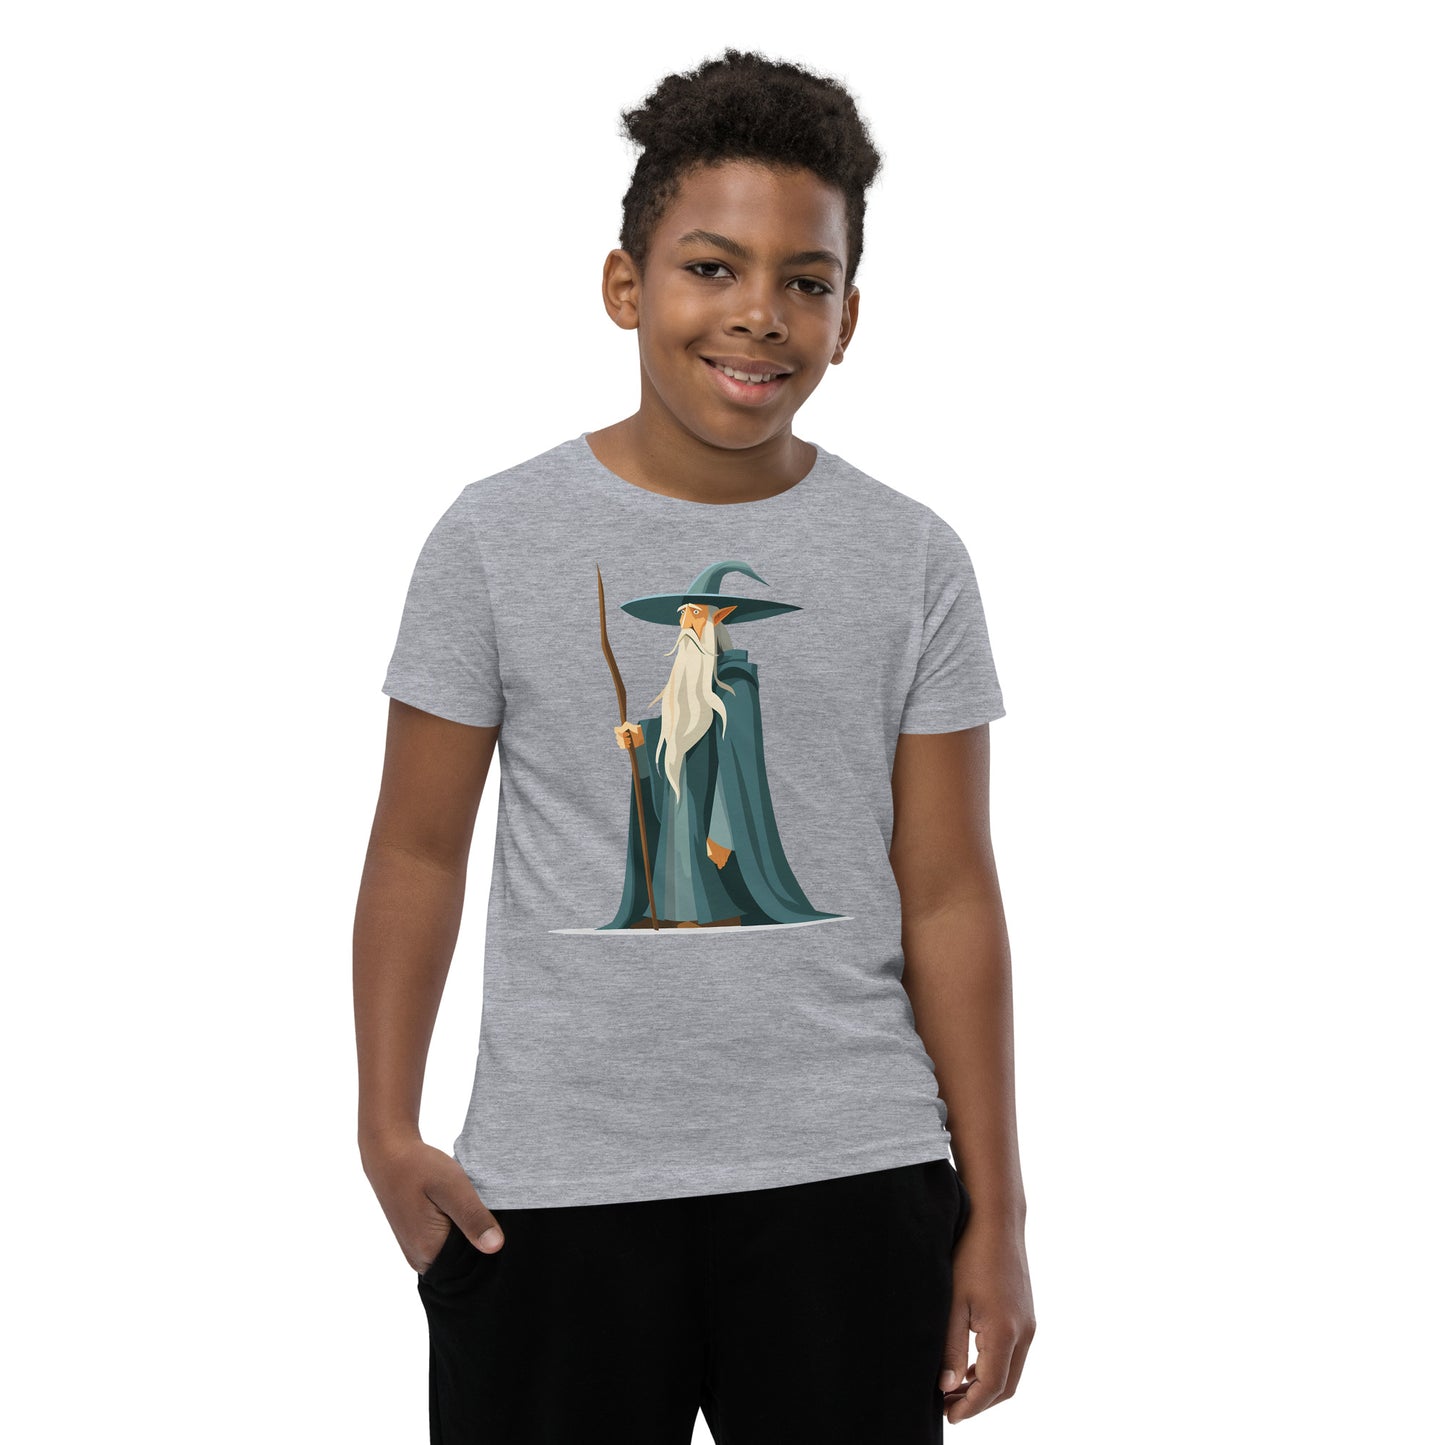 Boy with a grey T-shirt with a picture of a magician